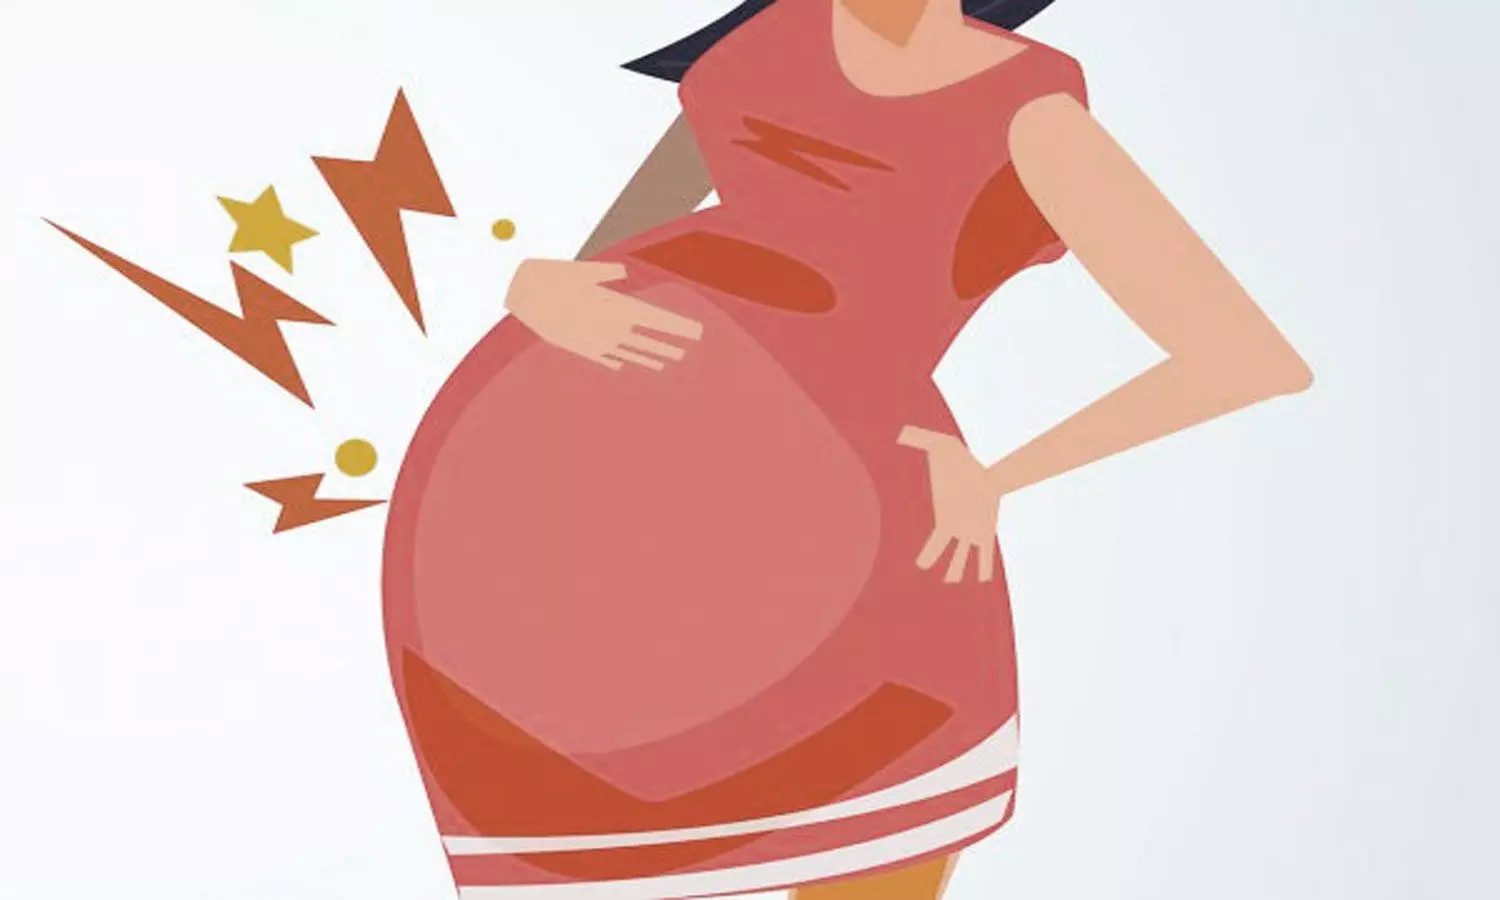 Obese women at higher risk of Hypertensive disorders of Pregnancy, finds study